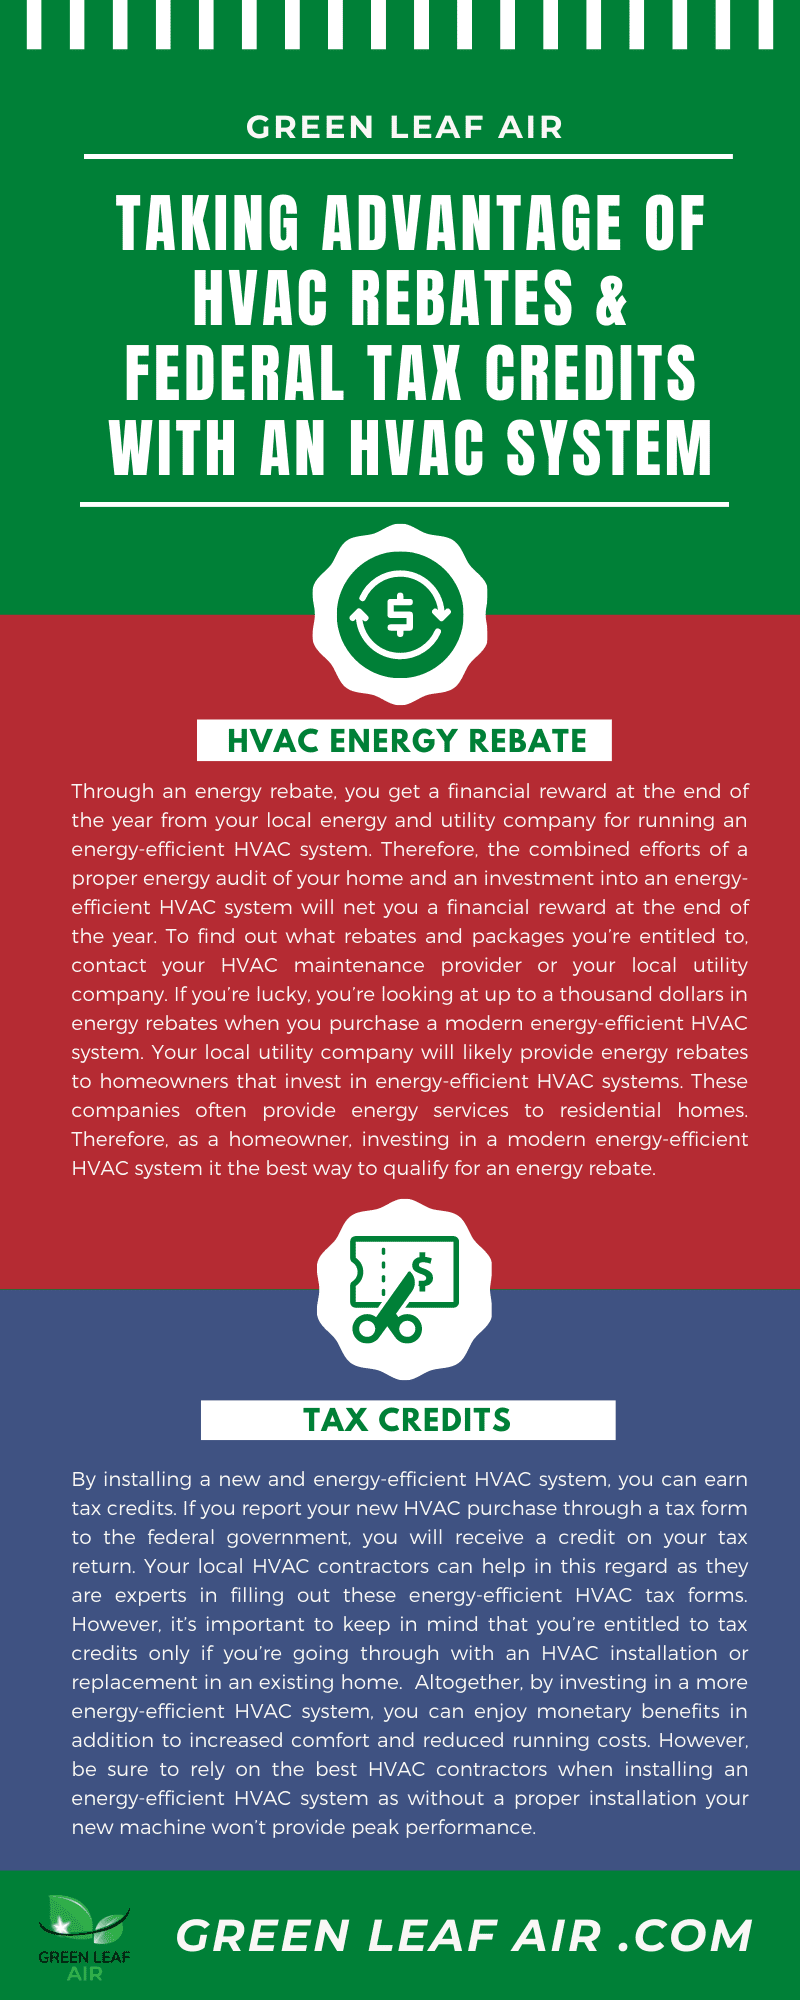 Taking Advantage of HVAC Rebates and Federal Tax Credits with An HVAC System